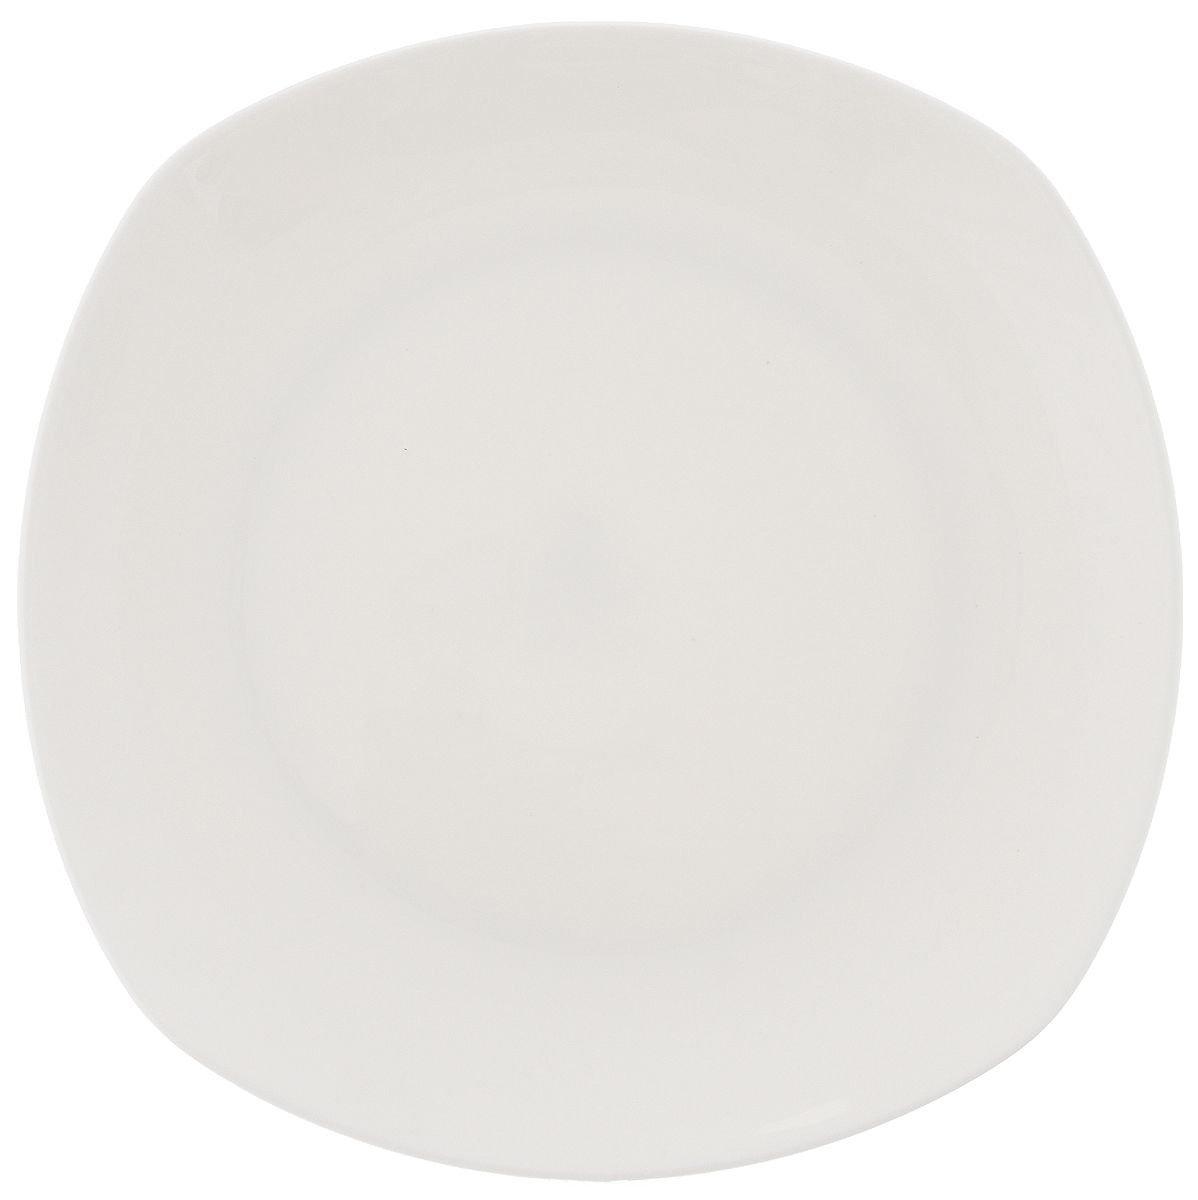 White Bread Plate 6.5" inch X 6.5" inch | 16.5 X 16.5 Cm - Durable, Microwave Safe, and Elegant | WILMAX, Goodies N Stuff